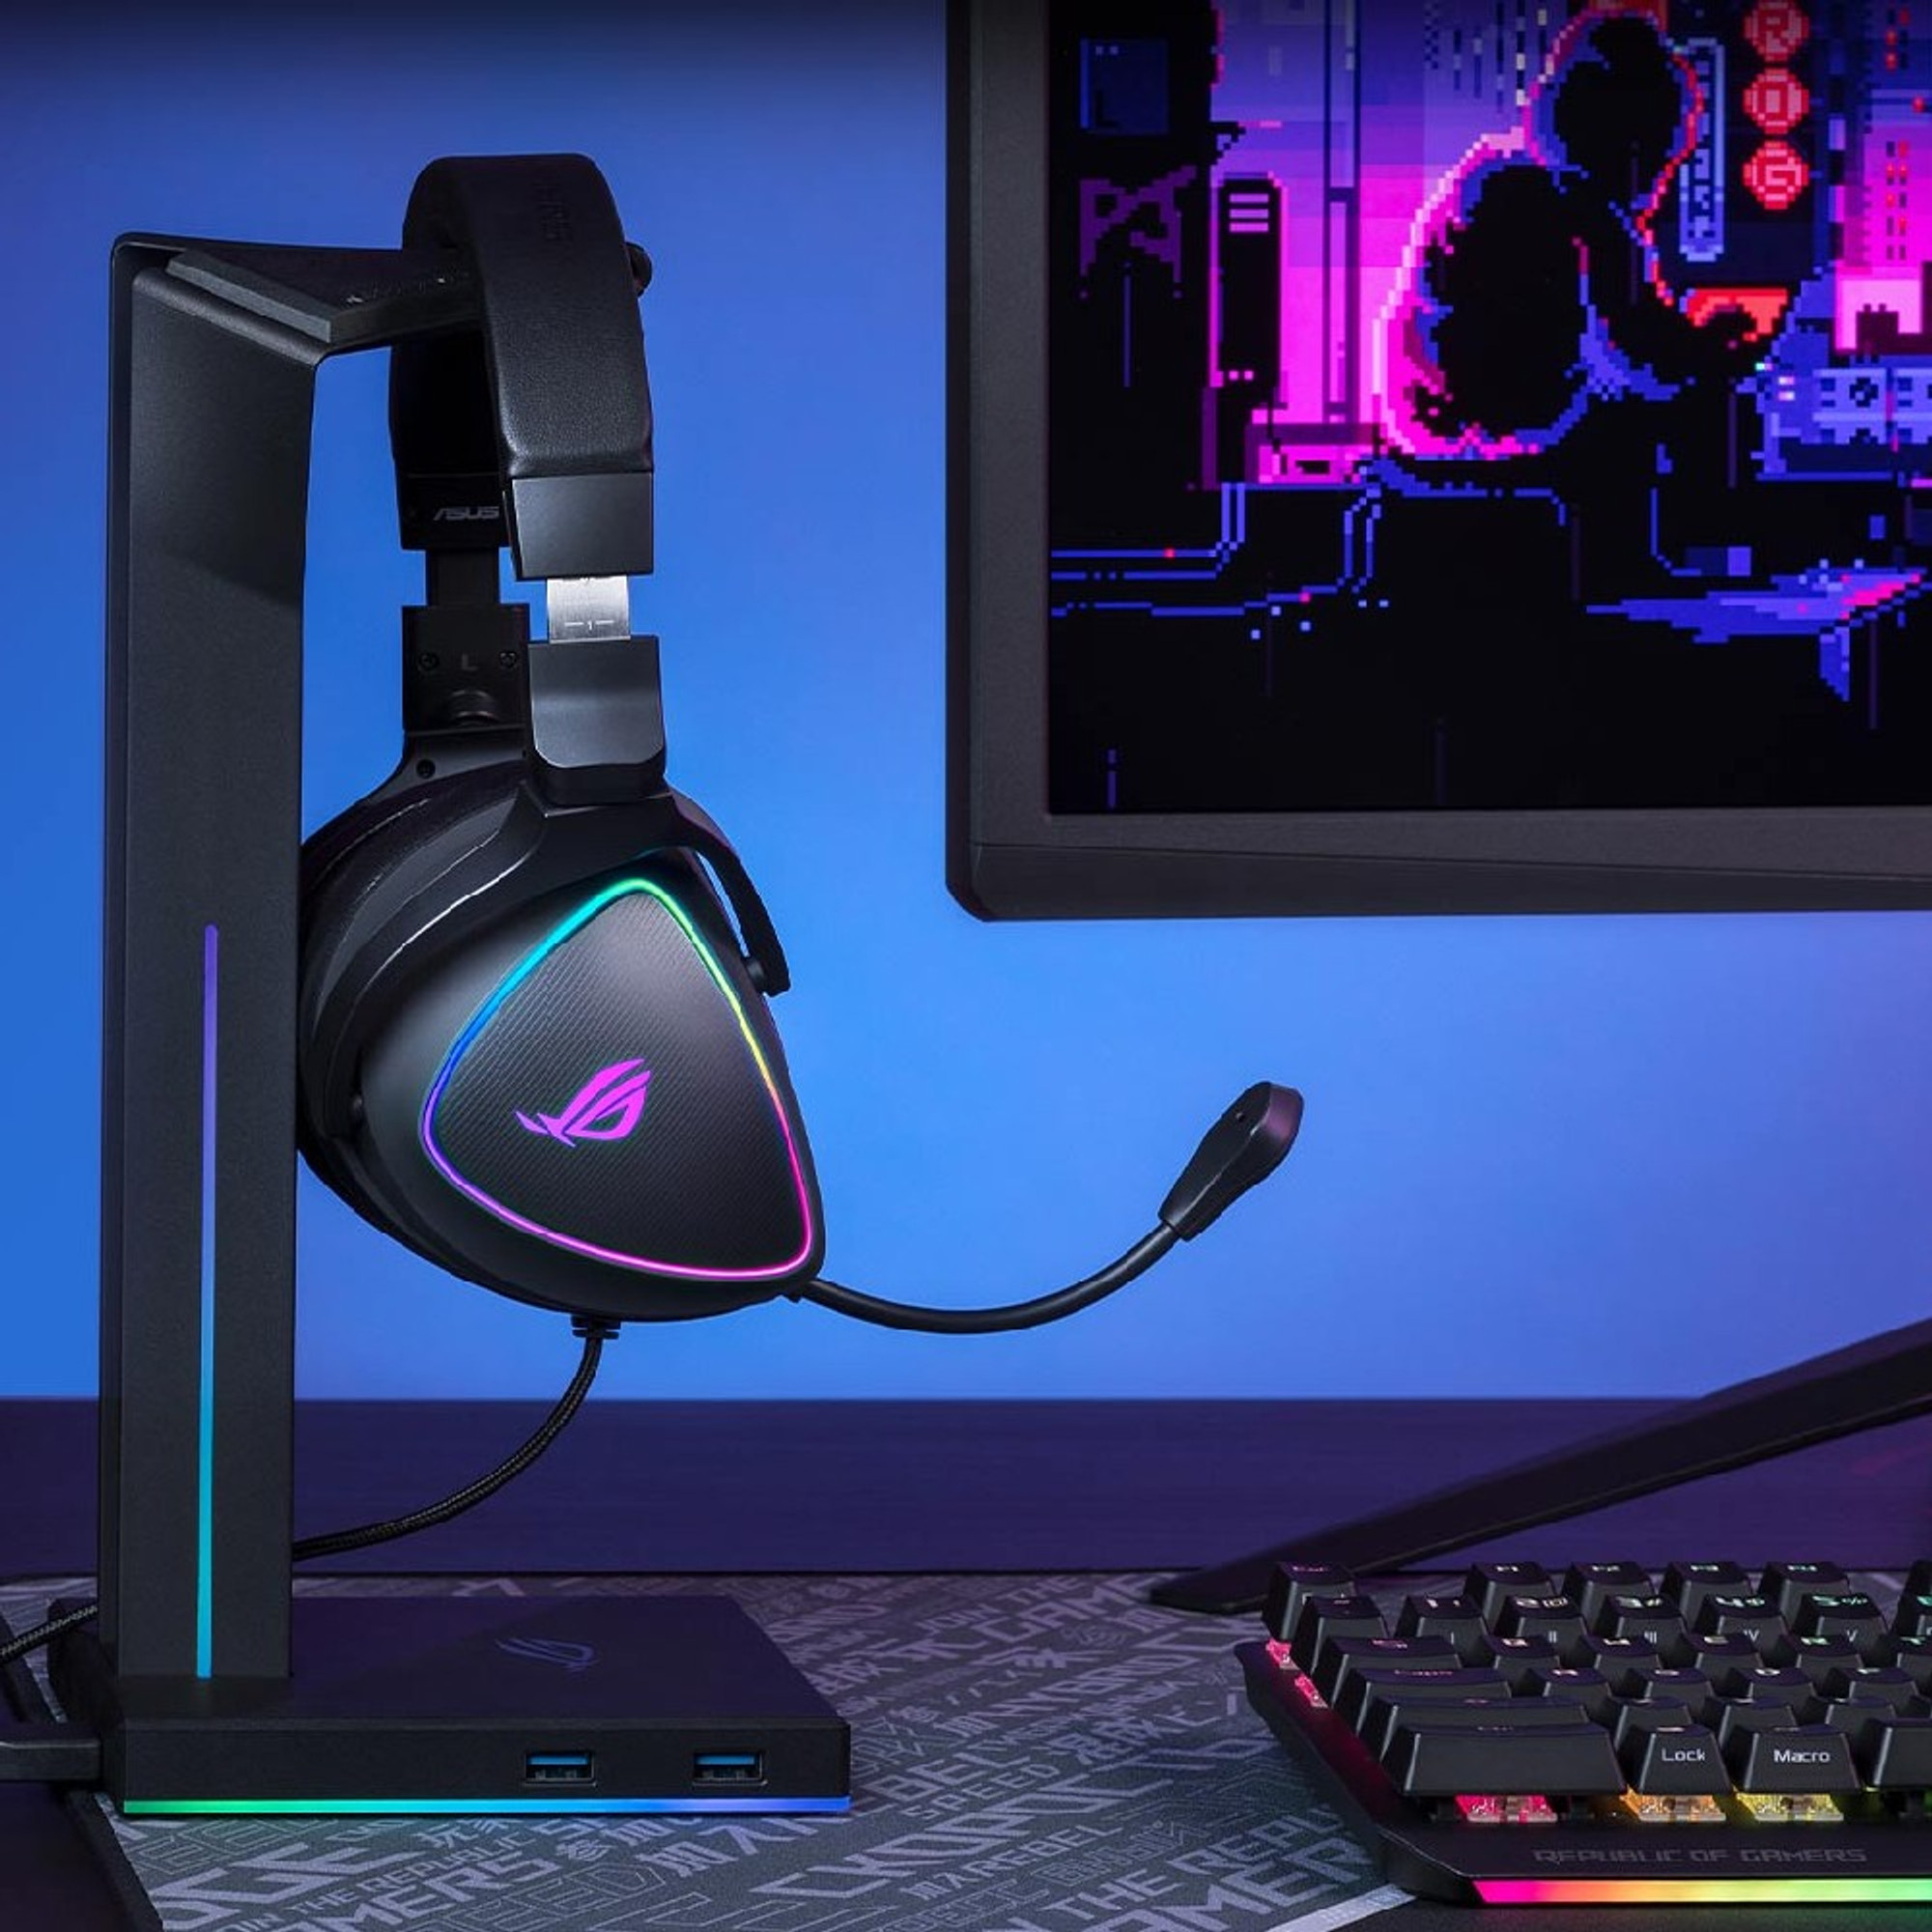 ROG Delta S Core  Gaming headsets-audio｜ROG - Republic of Gamers